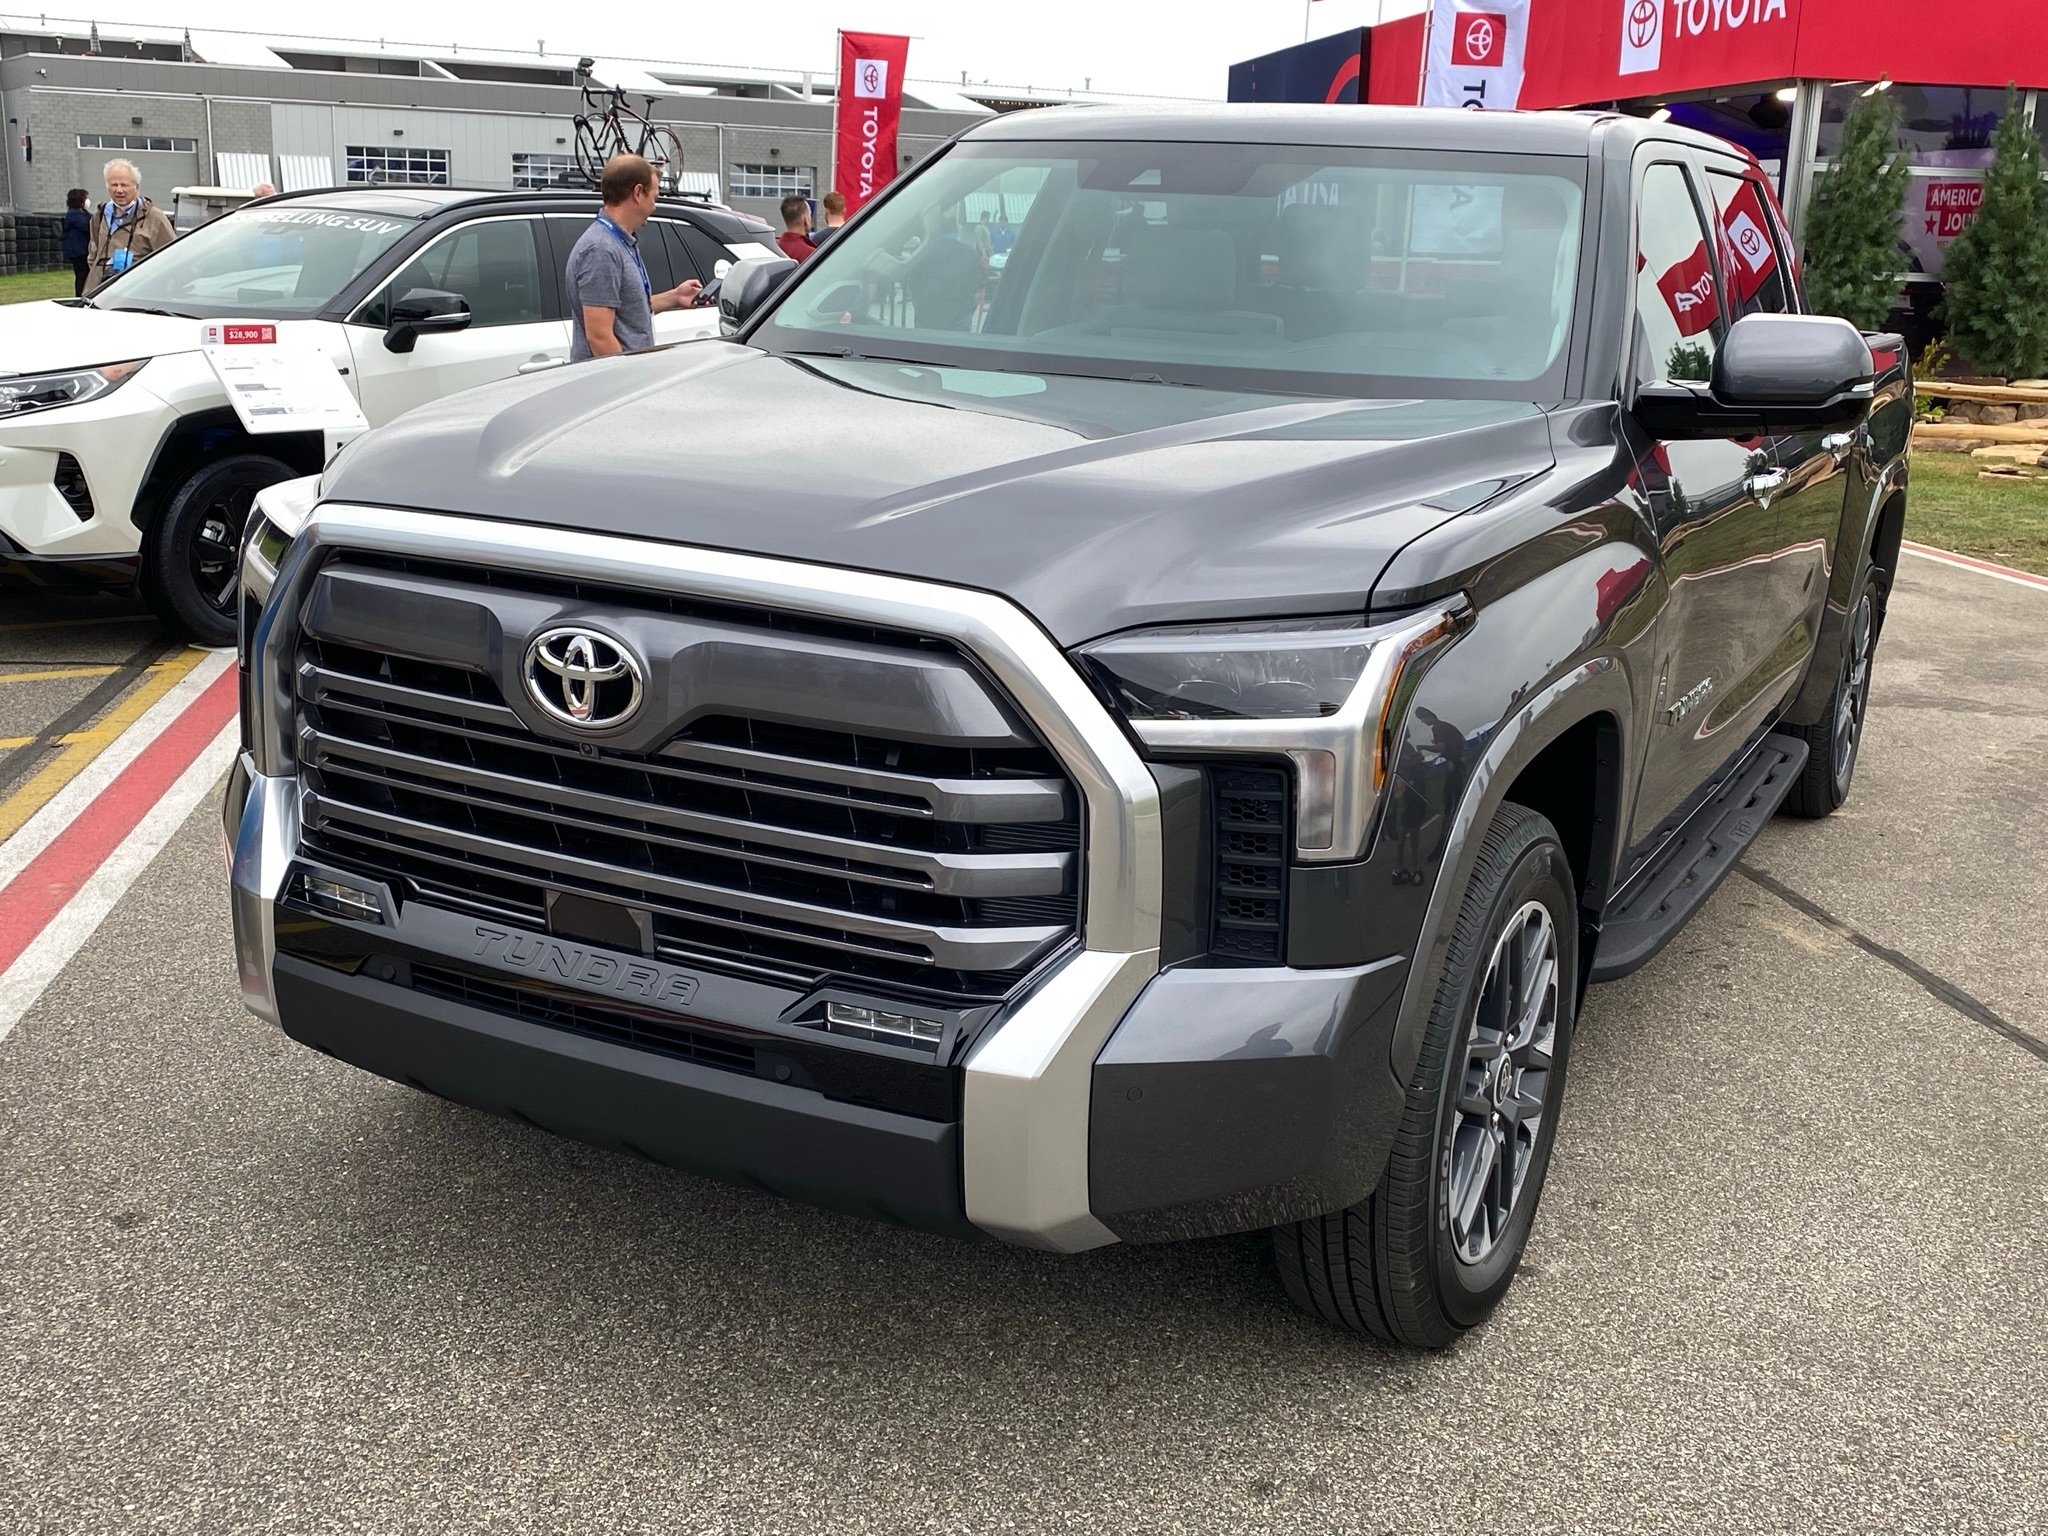 2022 Toyota Tundra: We Ask Why